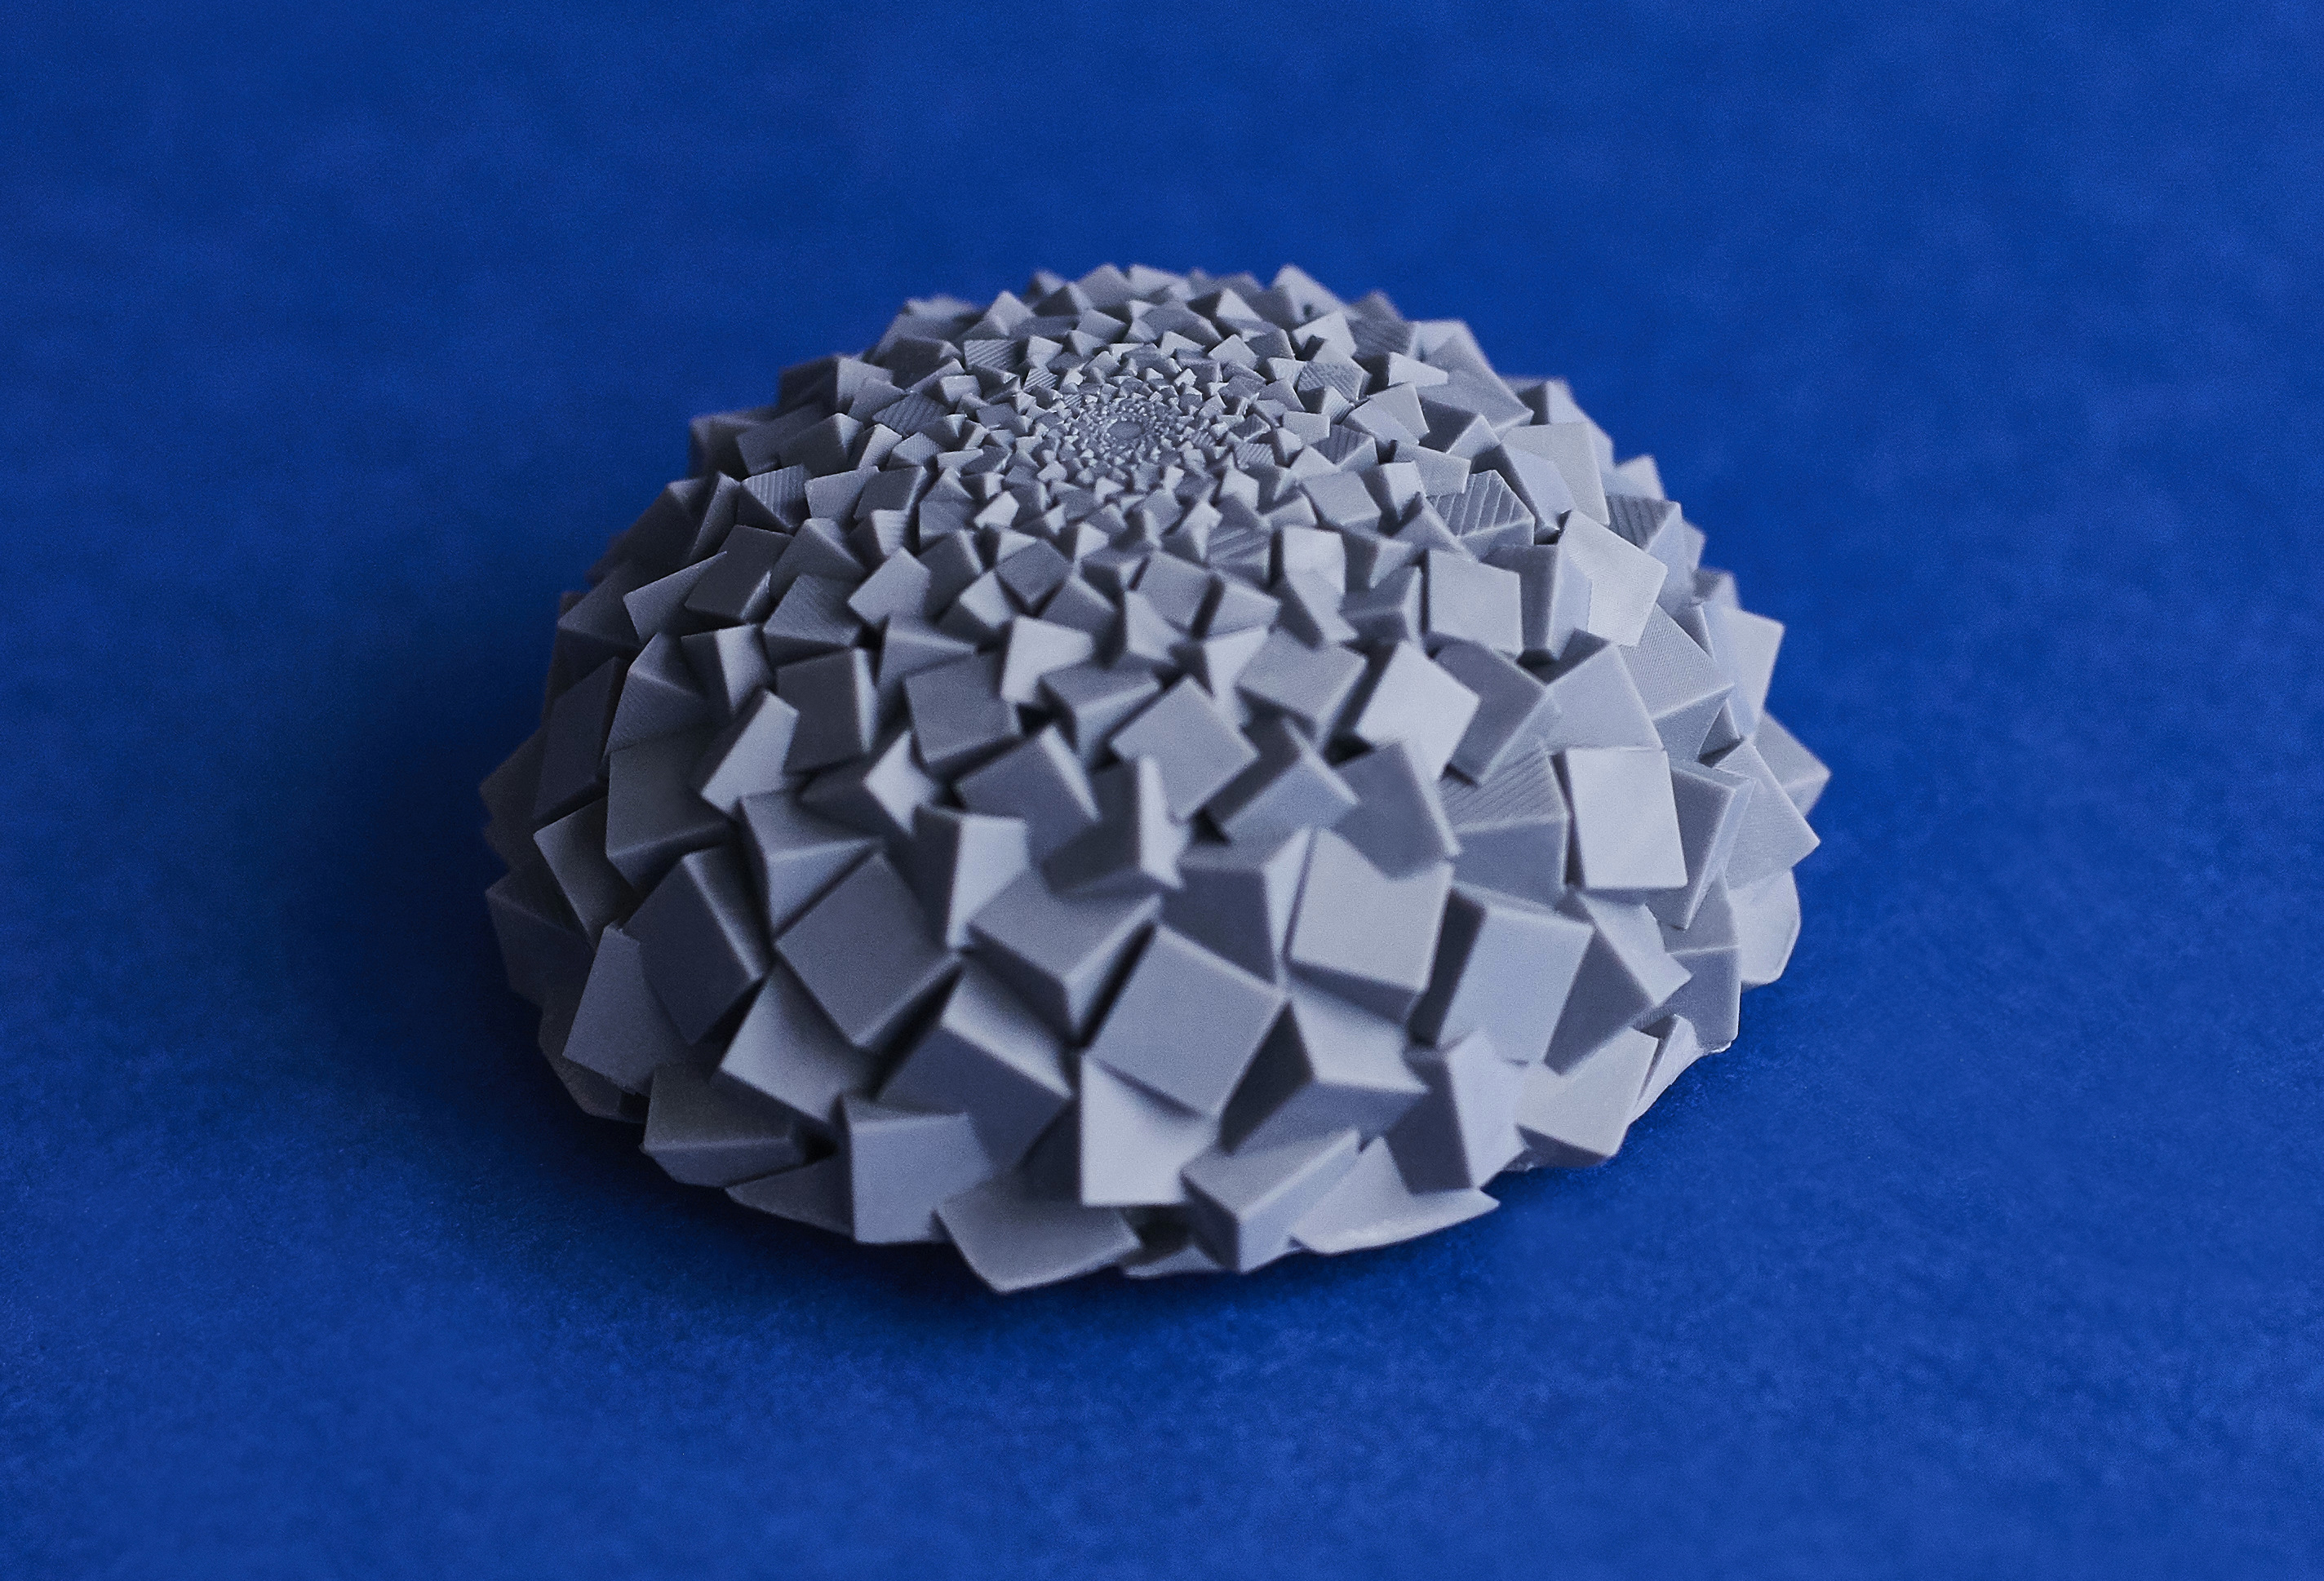 3D Printing with Carbon’s Prototyping Acrylate: the Q&A